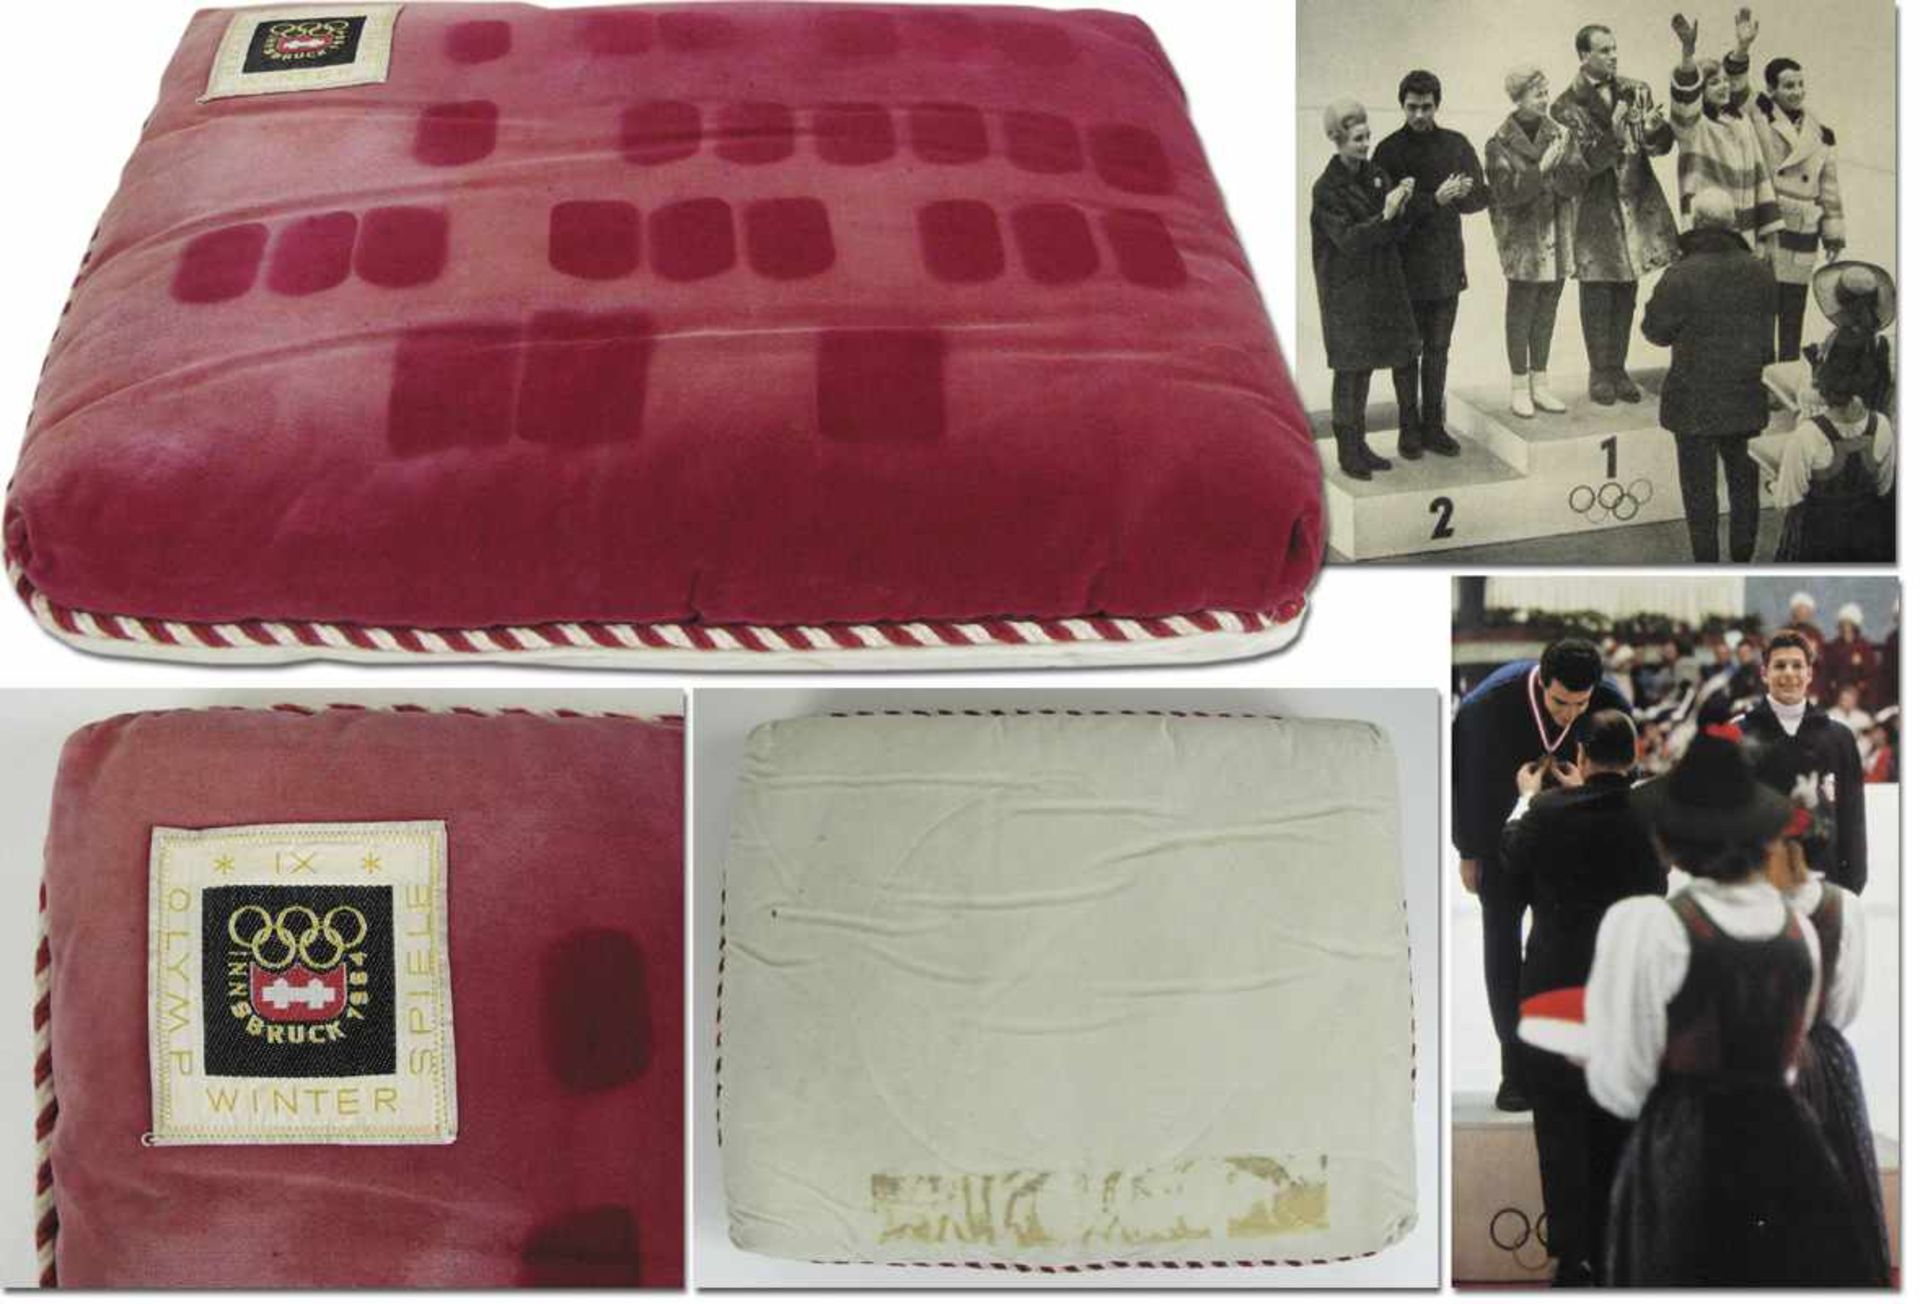 Olympic Games Innsbruck 1964. Medal Cushion - One of the cushions used at the ceremony when the